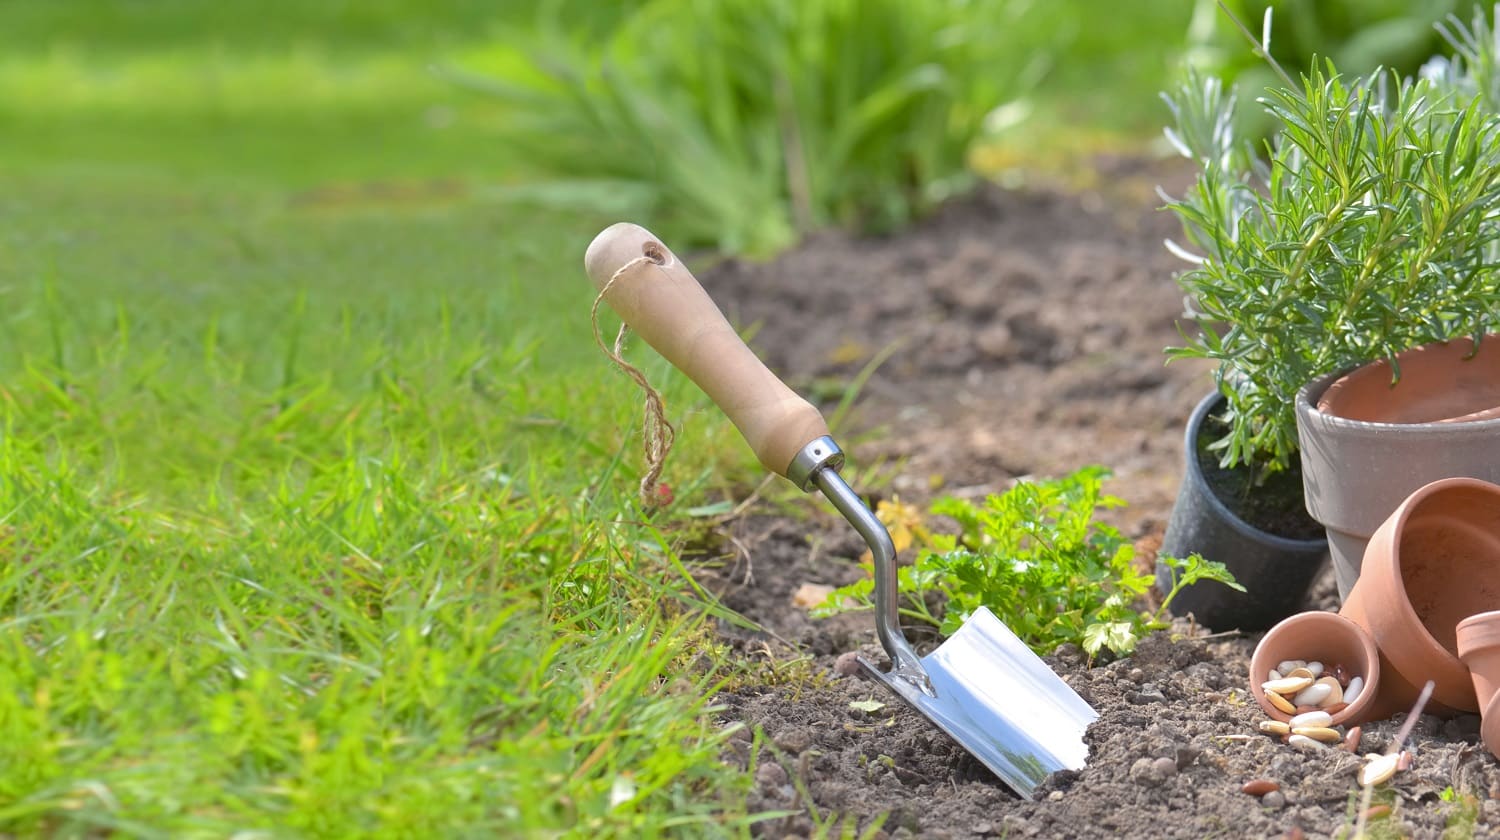 shovel planted in the soil of a garden next to teracotta pots and flowers with copy space in grass background